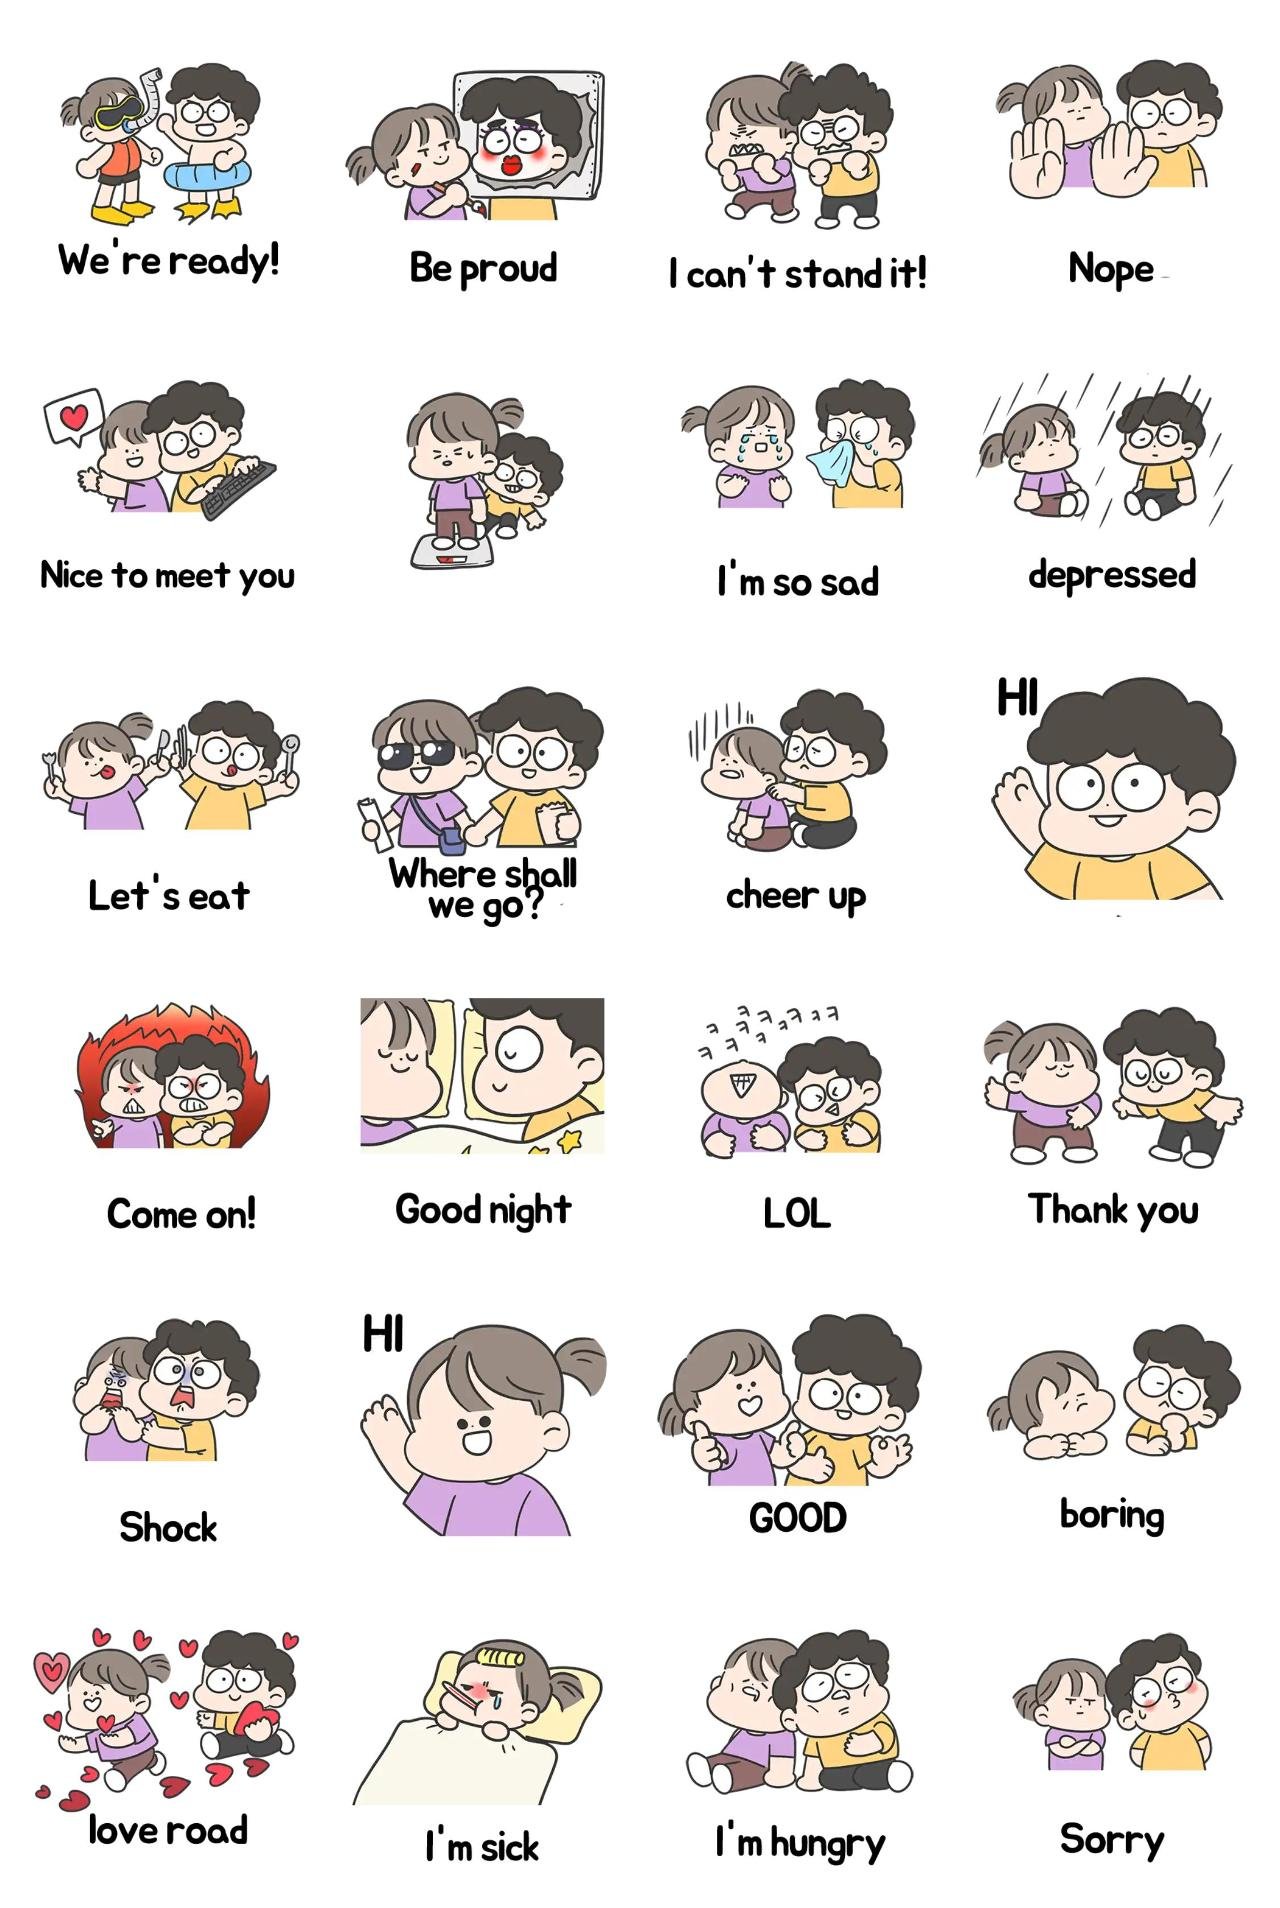 young and hong People sticker pack for Whatsapp, Telegram, Signal, and others chatting and message apps